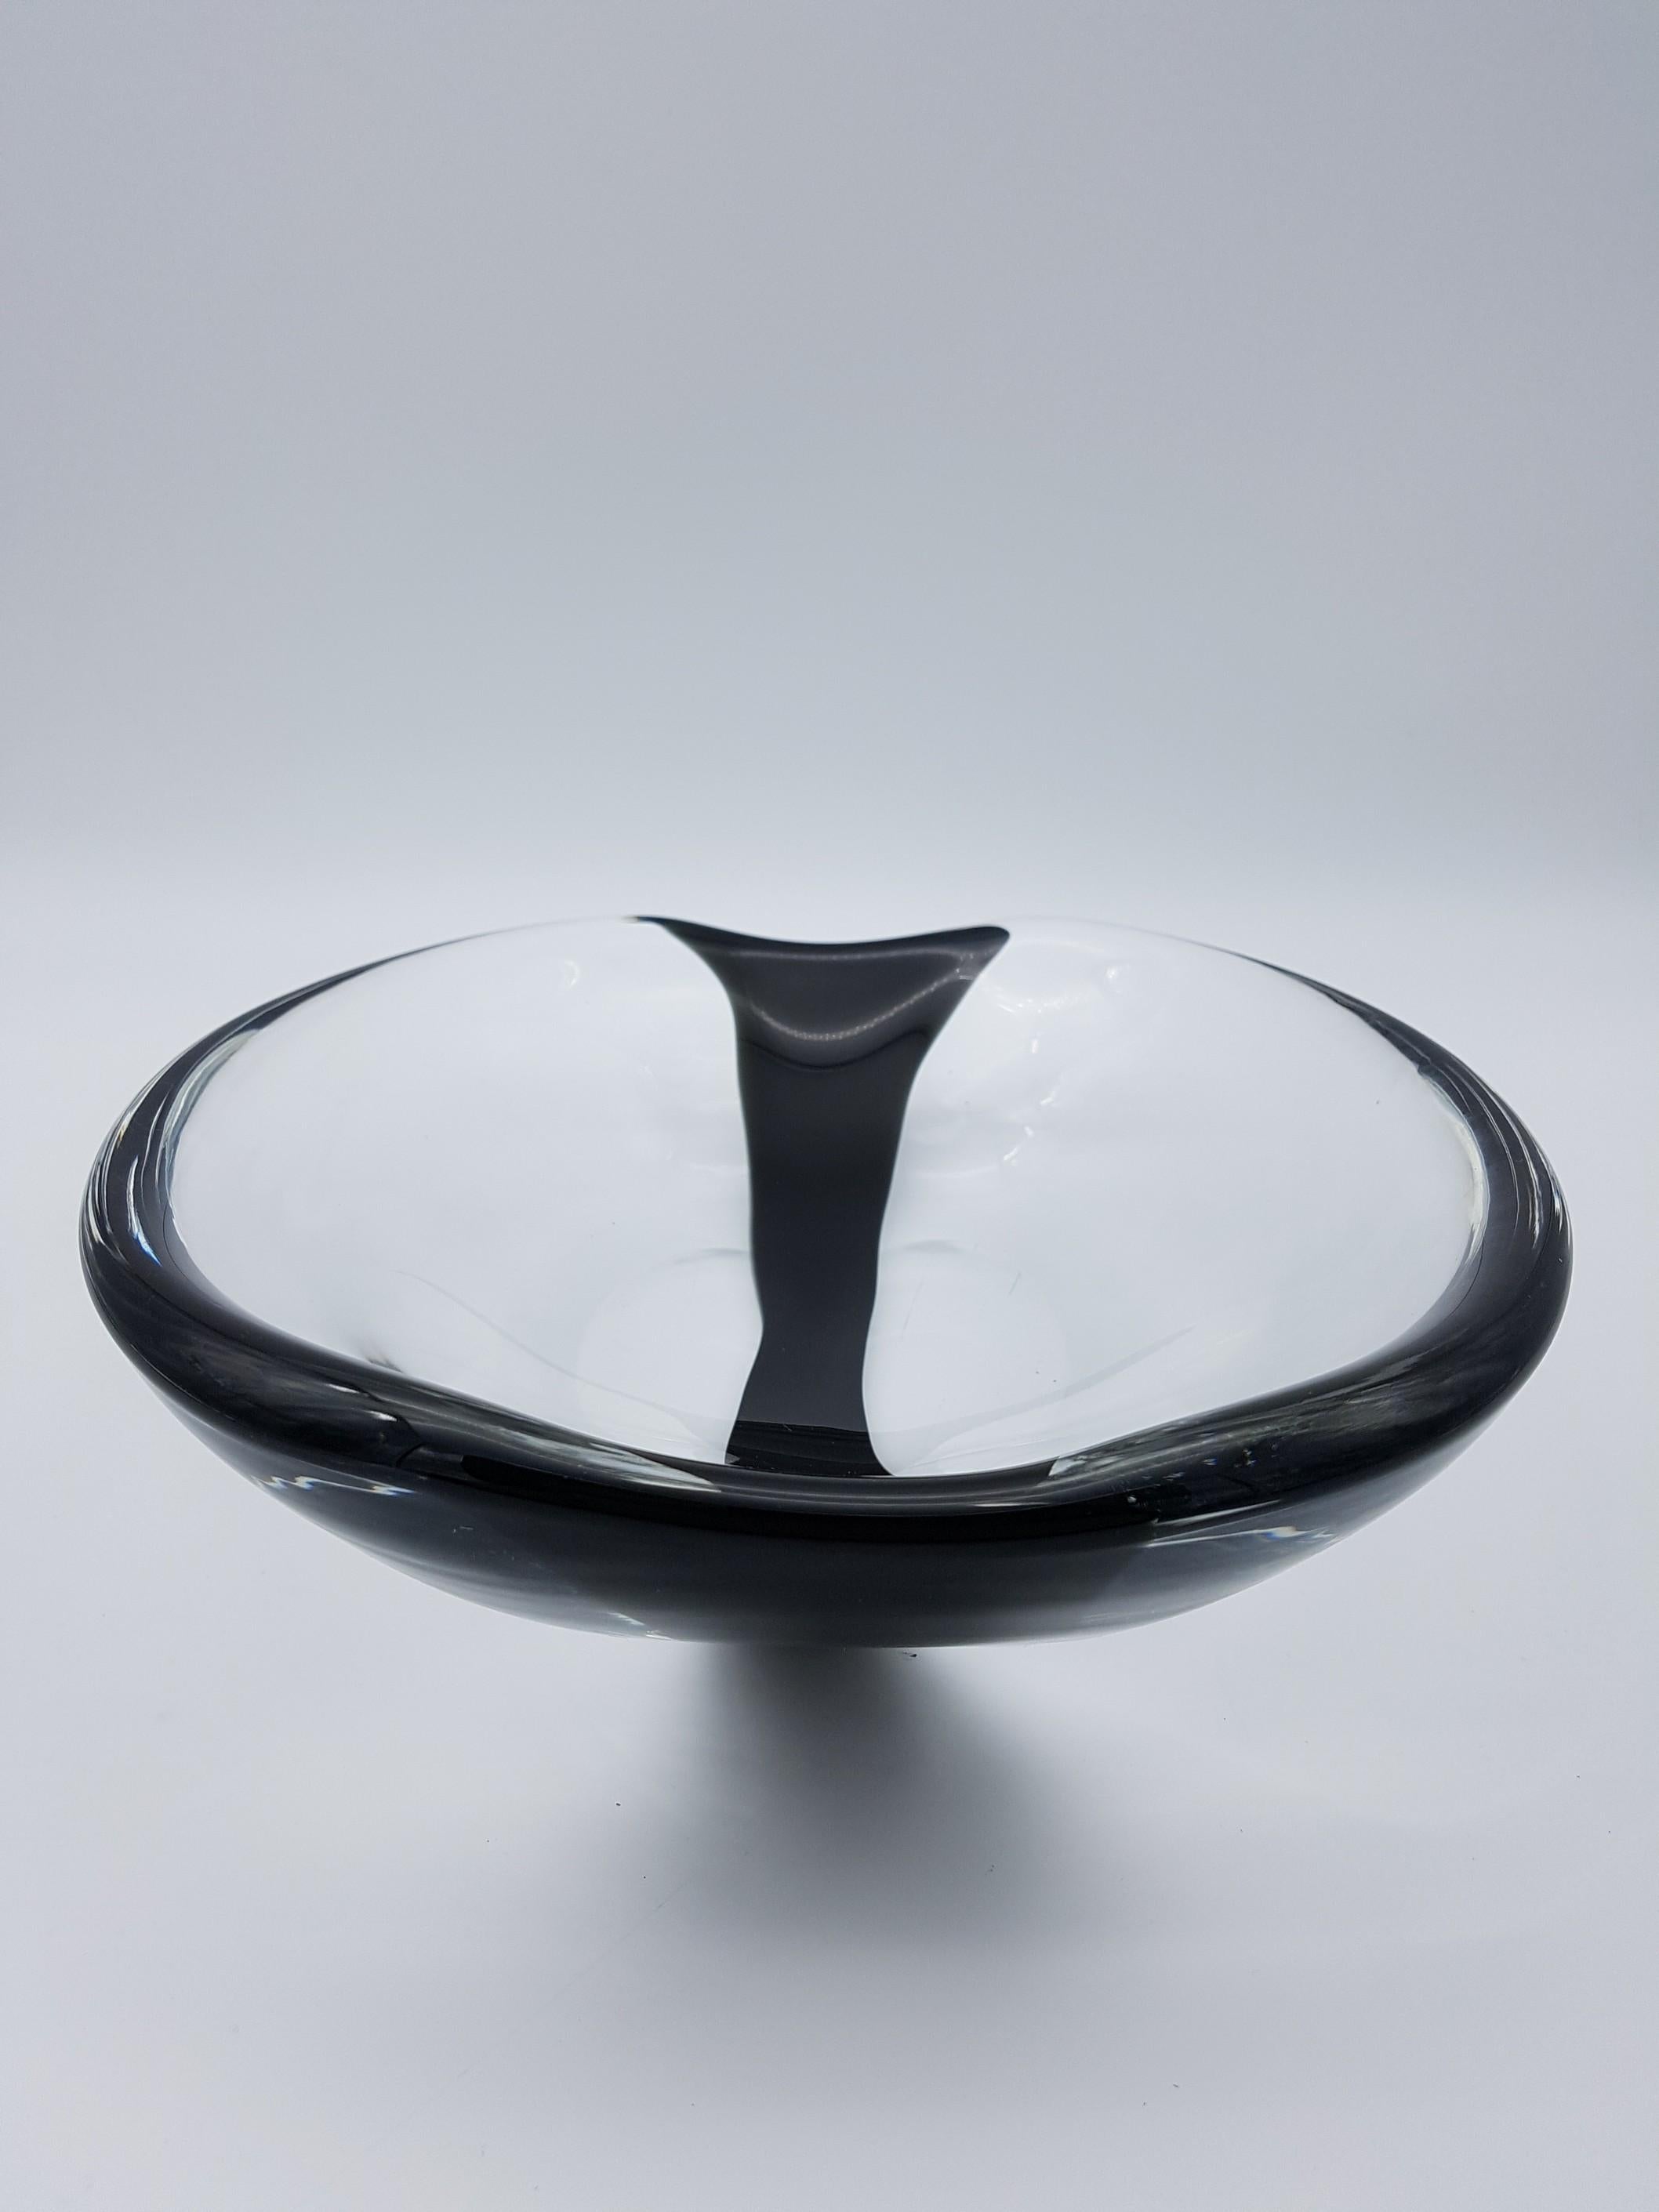 Vintage Murano glass dish/centerpiece by Gino Cenedese e Figlio, completely handmade in the mid-1960s and designed by Mr. Antonio da Ros. This dish is a stunning example of design at its best: the motto 